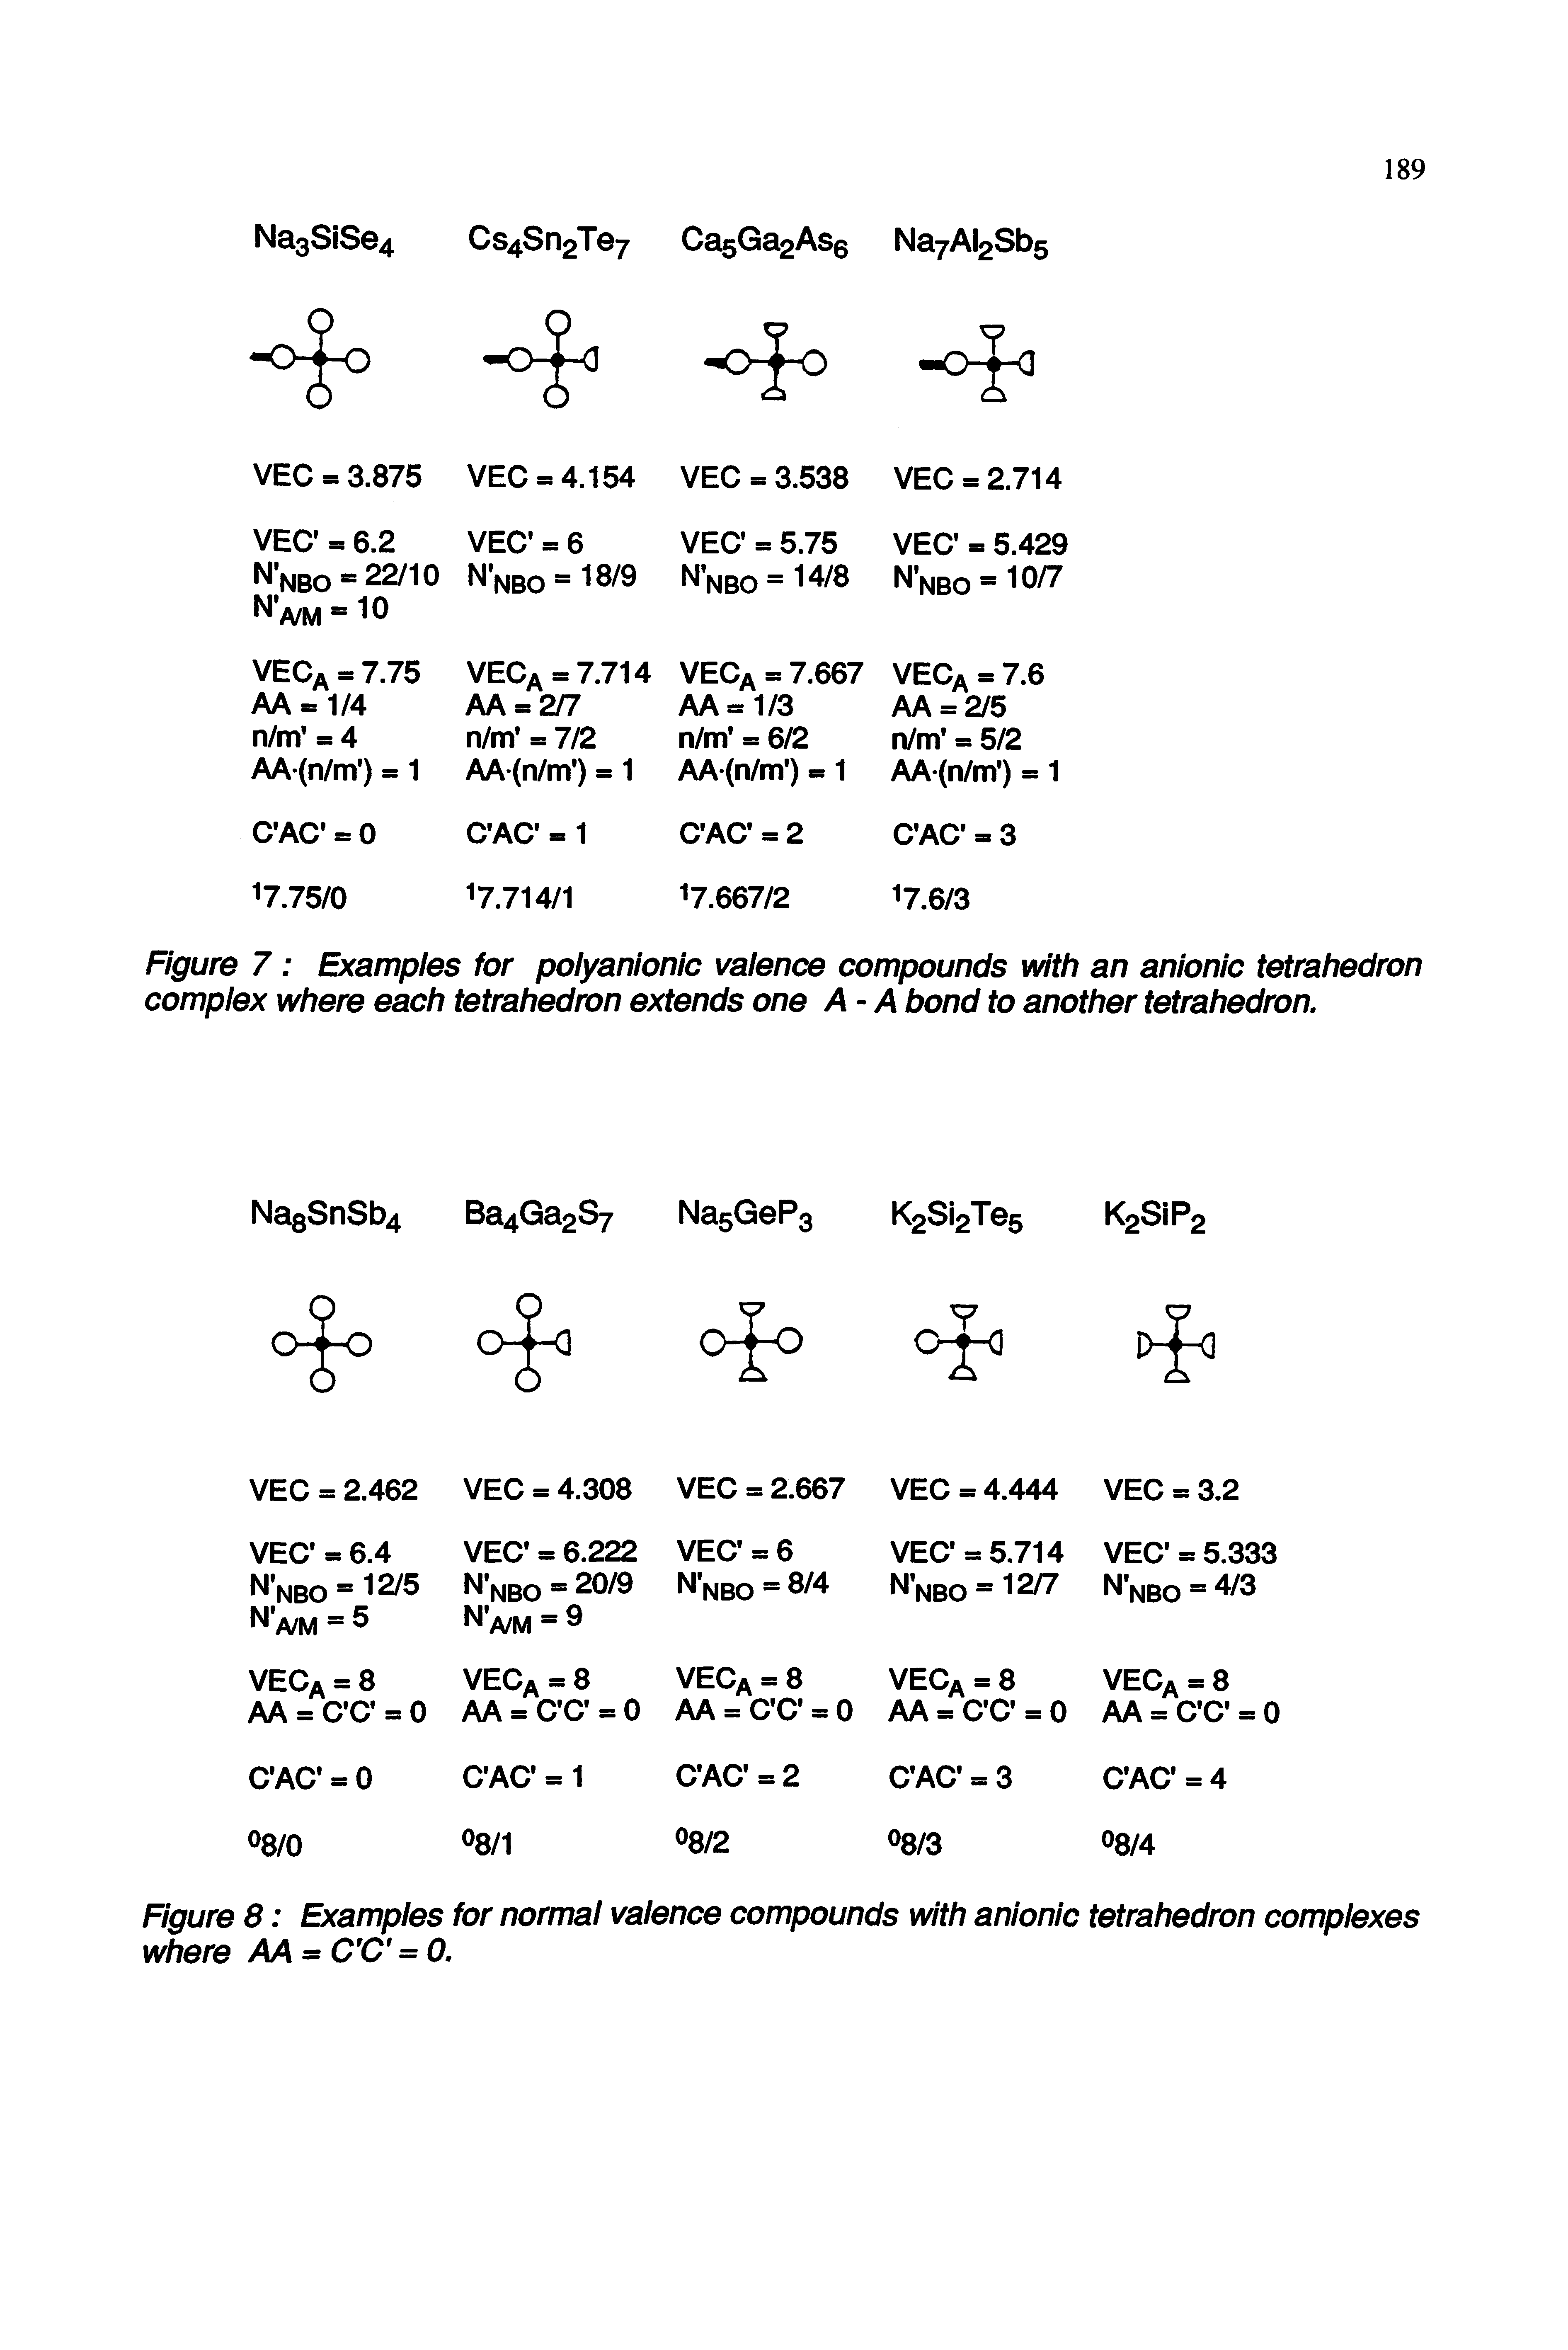 Figure 7 Examples for polyanlonic valence compounds with an anionic tetrahedron complex where each tetrahedron extends one A - A bond to another tetrahedron.